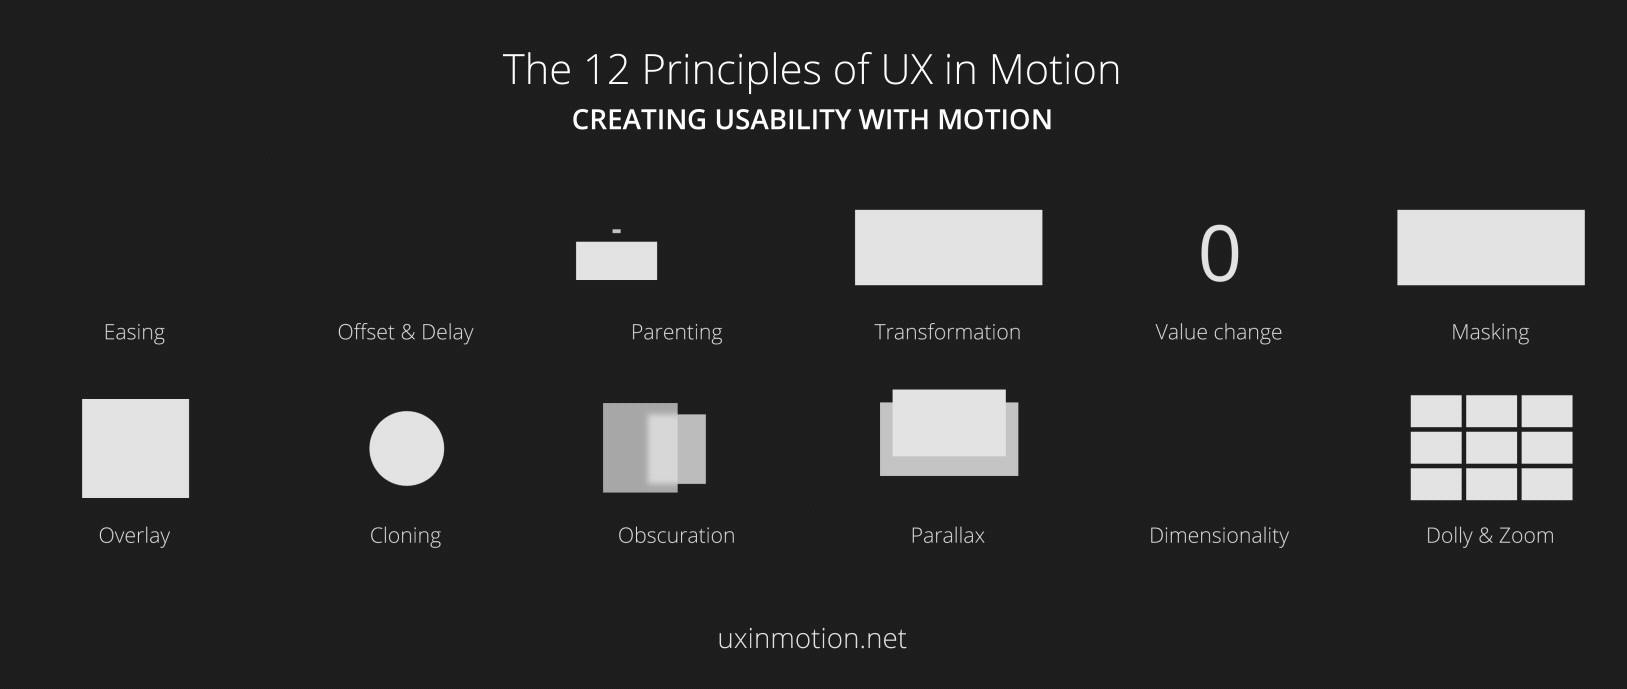 The UX in Motion Manifesto